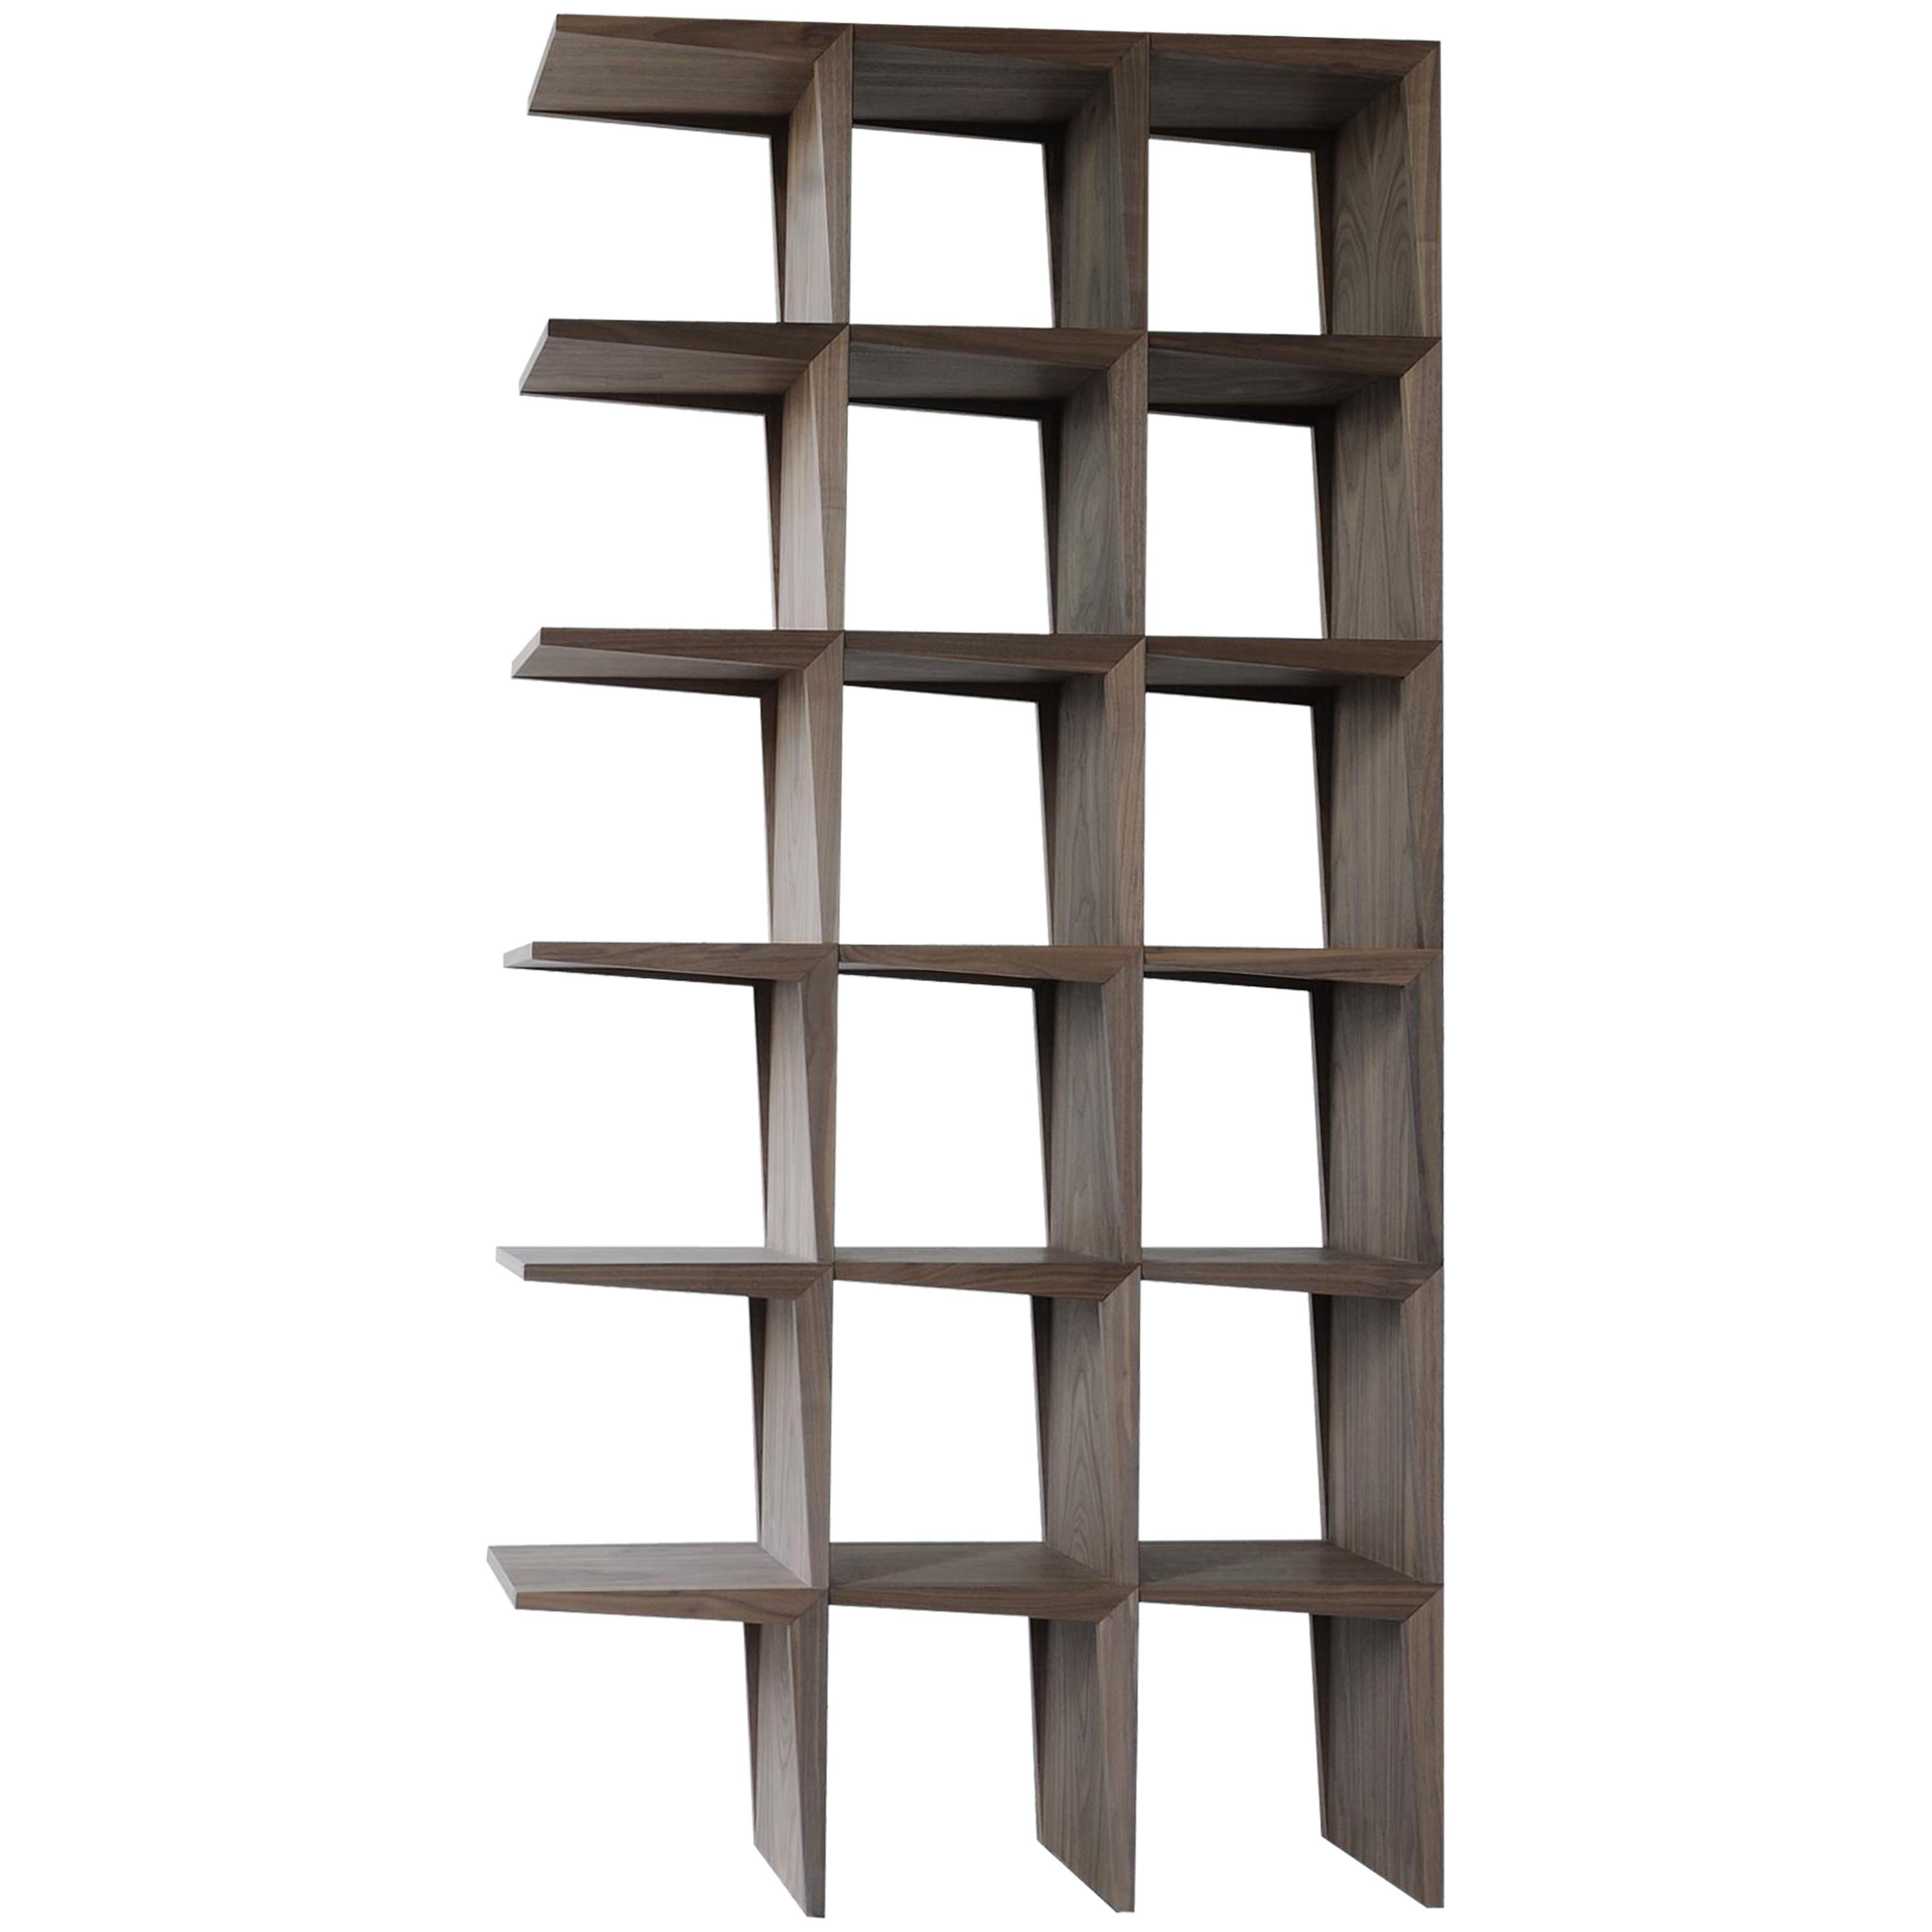 Kant, contemporary freestanding bookshelf made of walnut Canaletto wood, or ash wood available in different finishes.
Design Itamar Harari
Made in Italy by Morelato